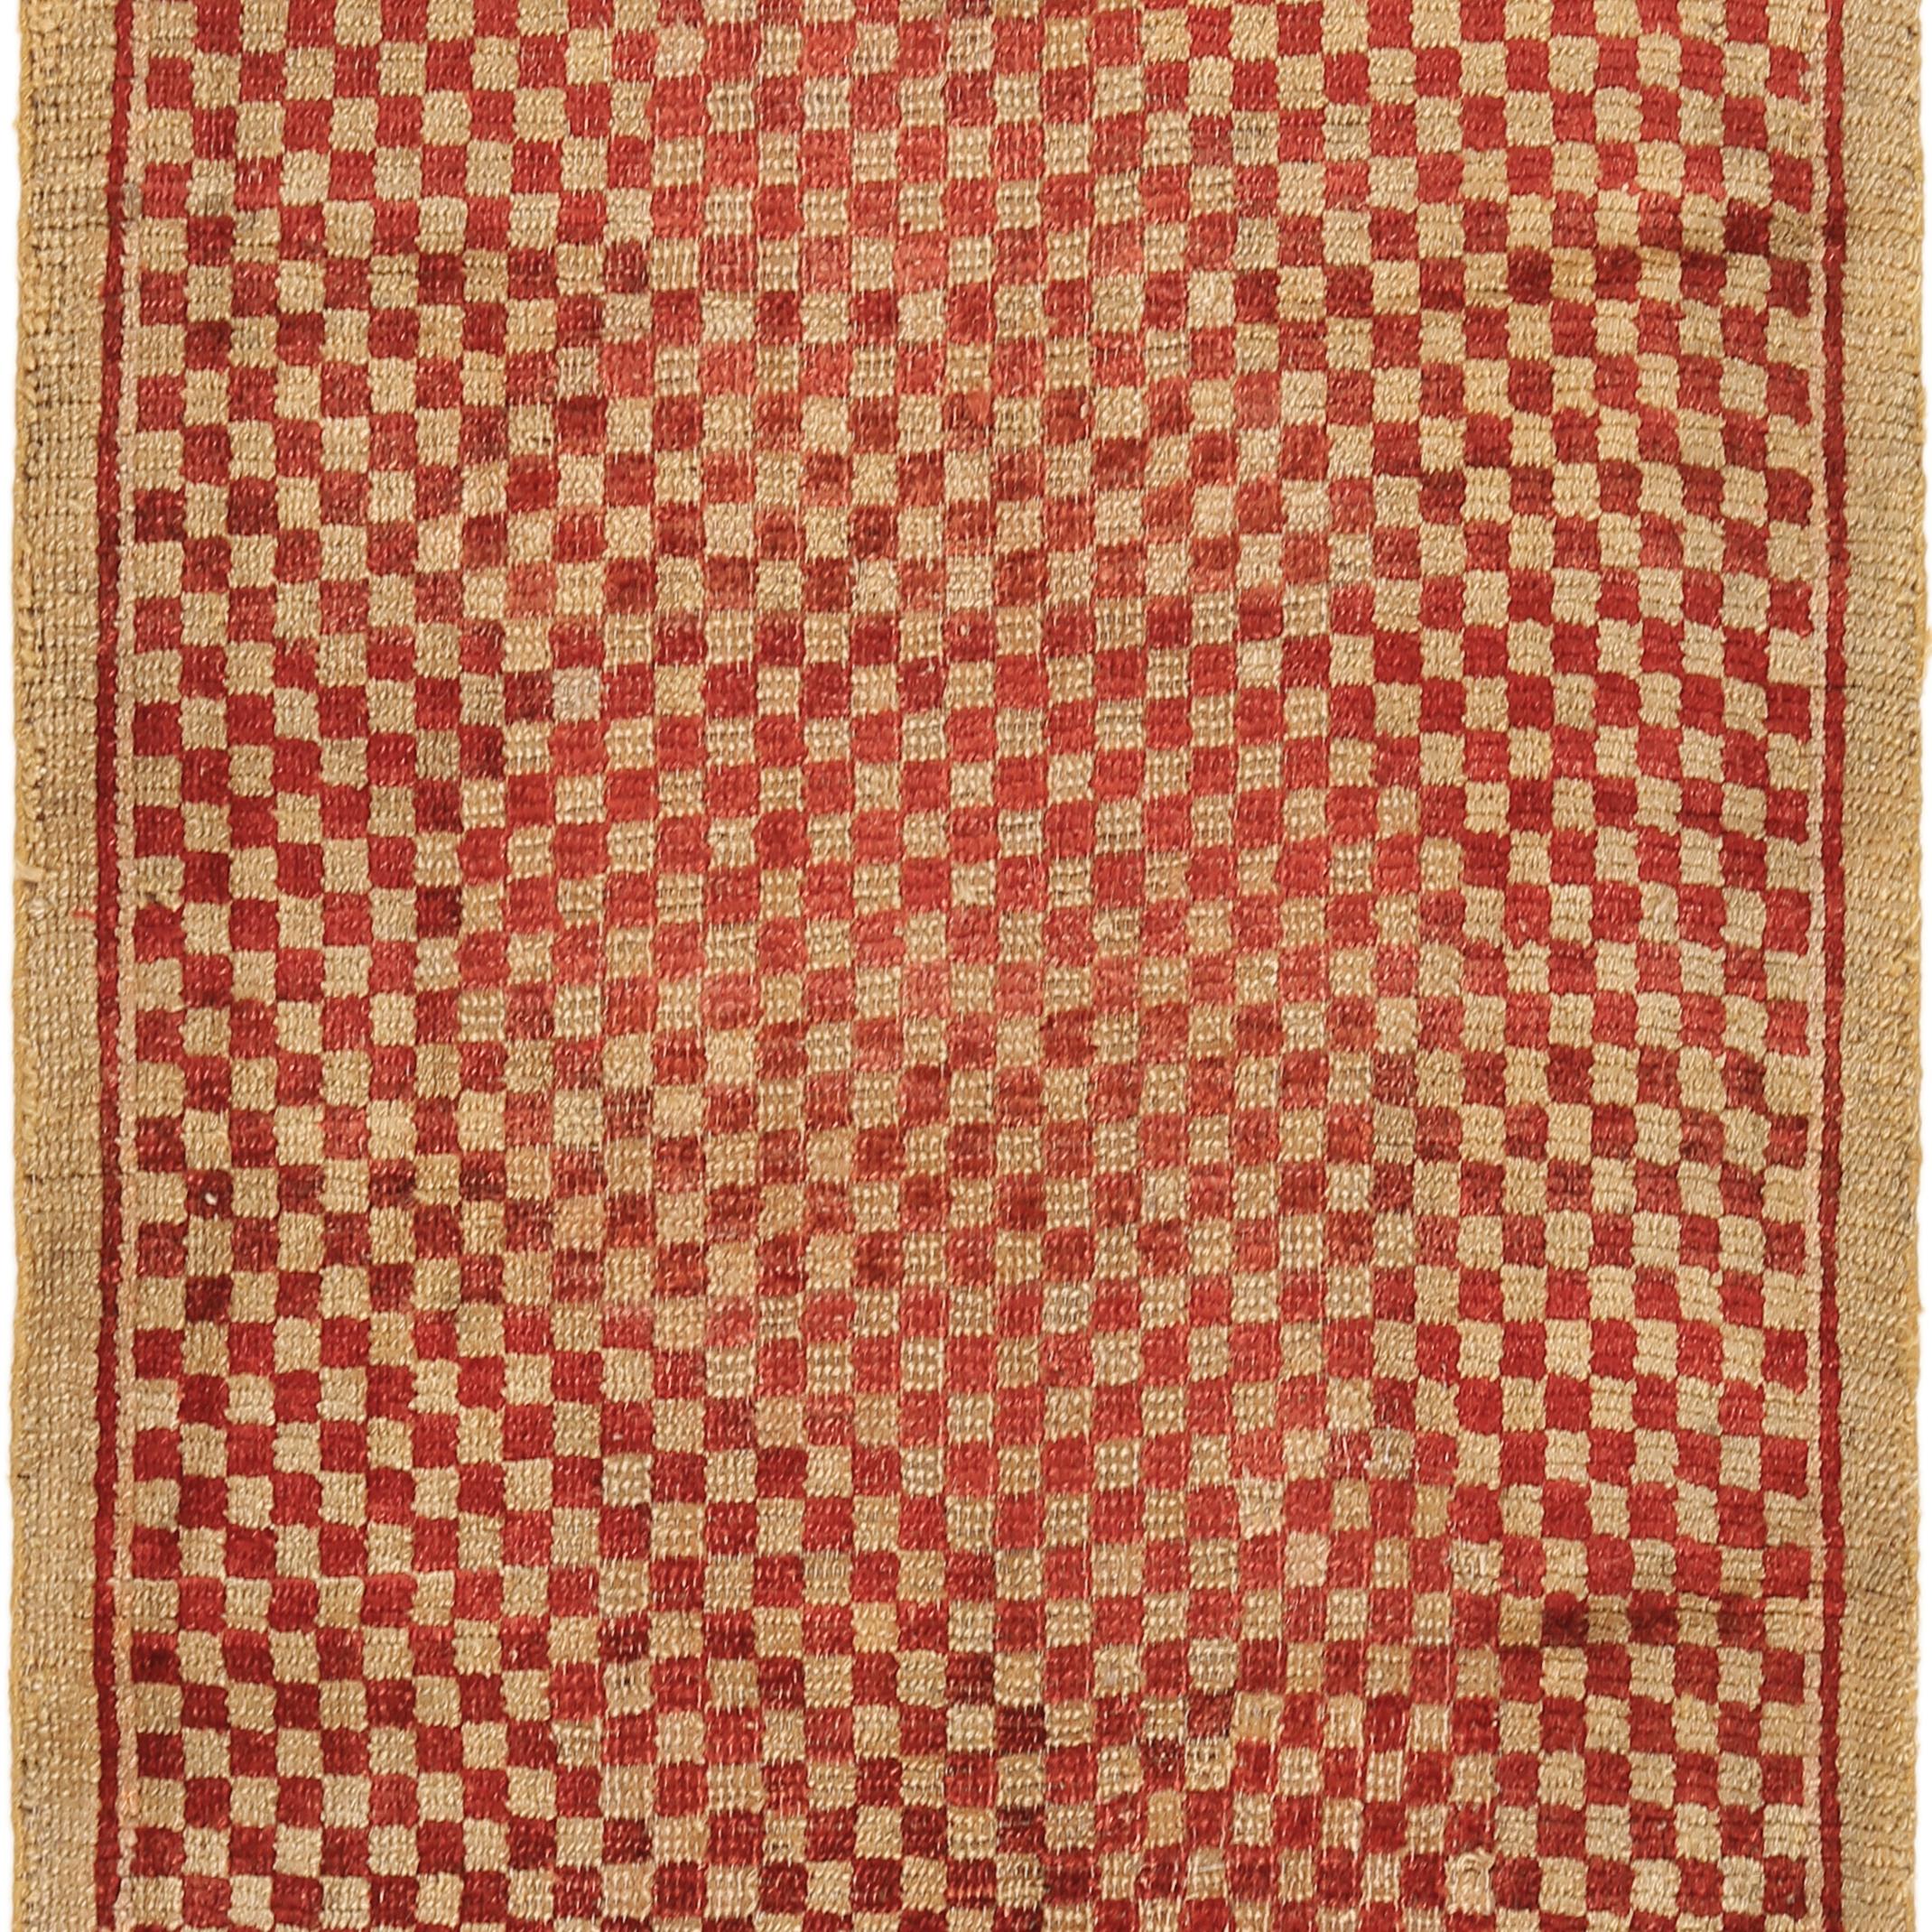 Antique Tibetan Red and White Checkerboard Design Meditation Rug In Good Condition For Sale In Milan, IT